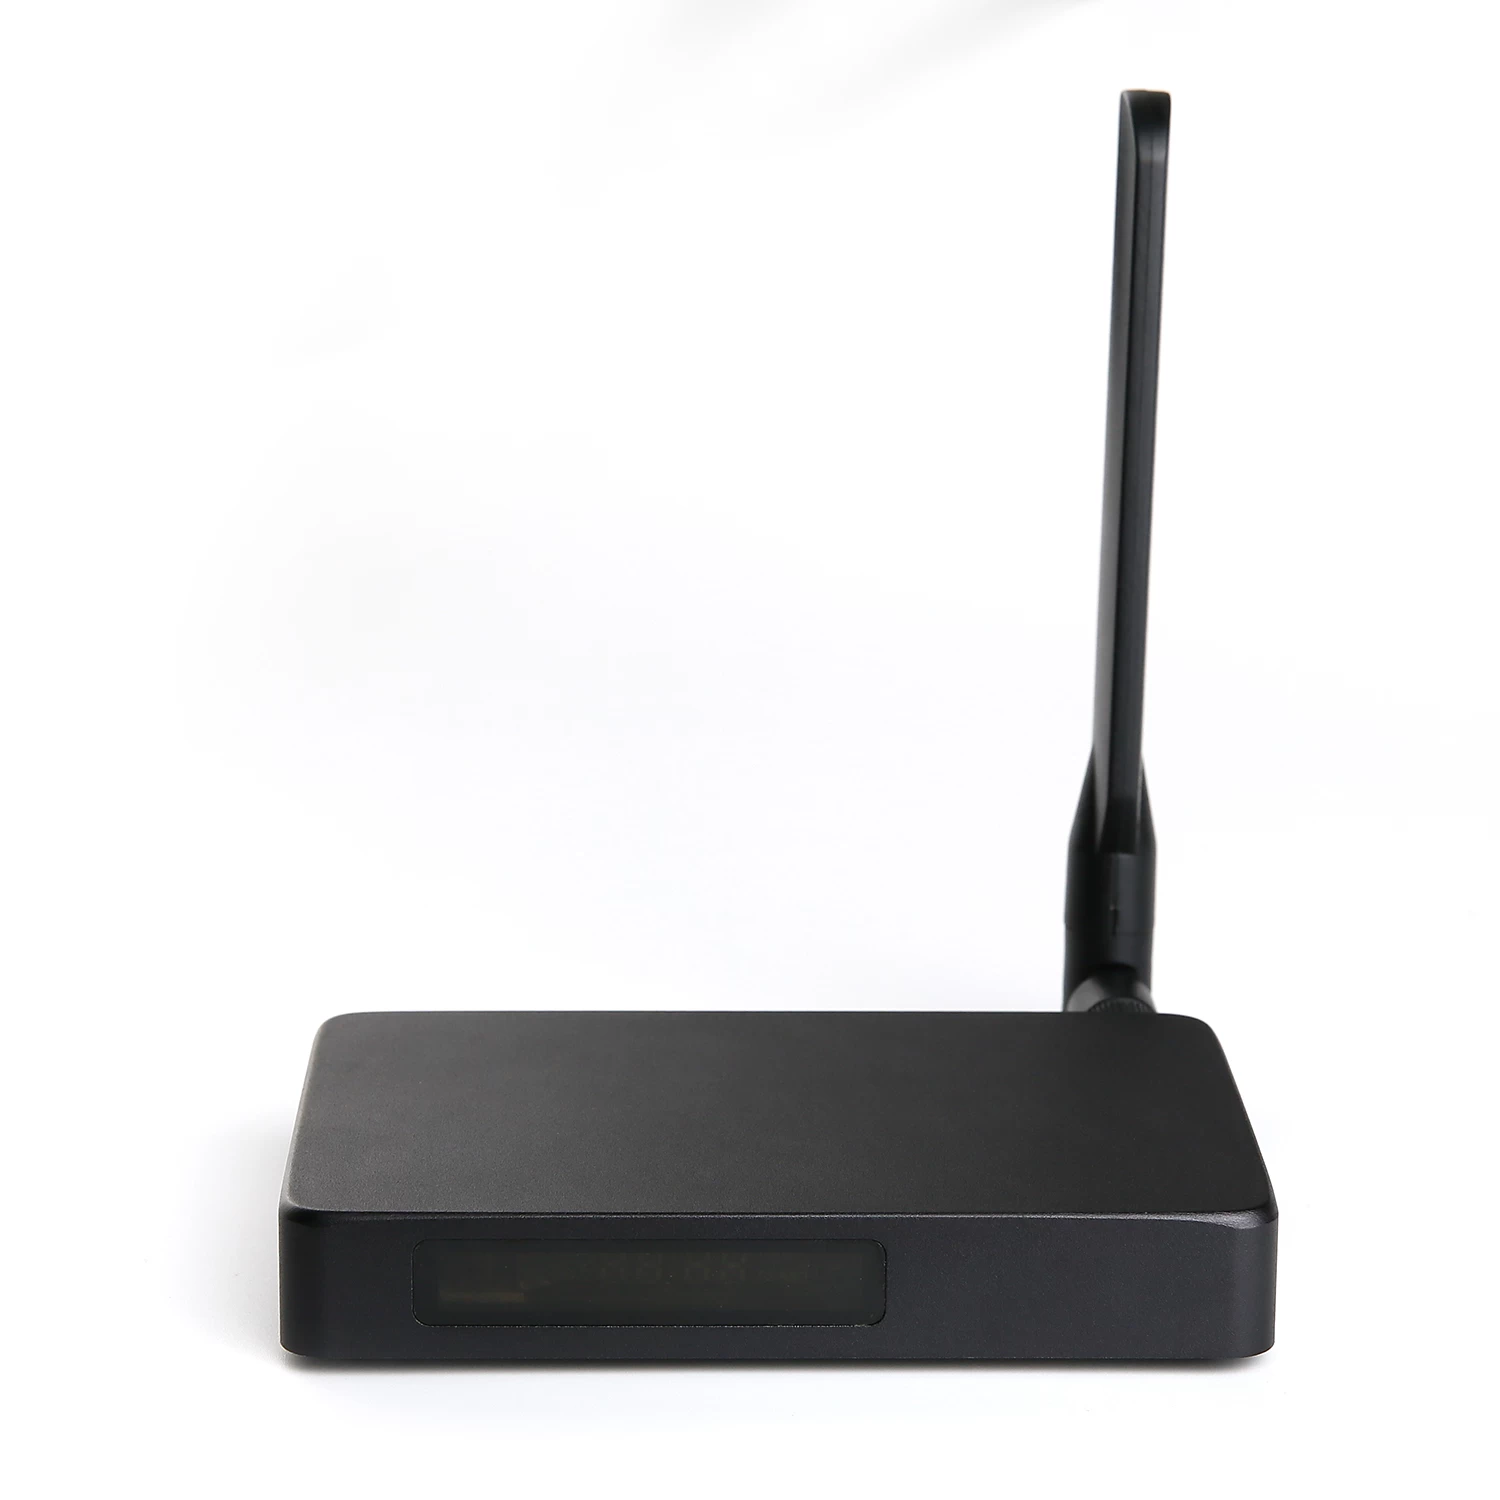 Android Tv Box solution provider, Android TV Box Custom, Android TV Box support LED/LCD